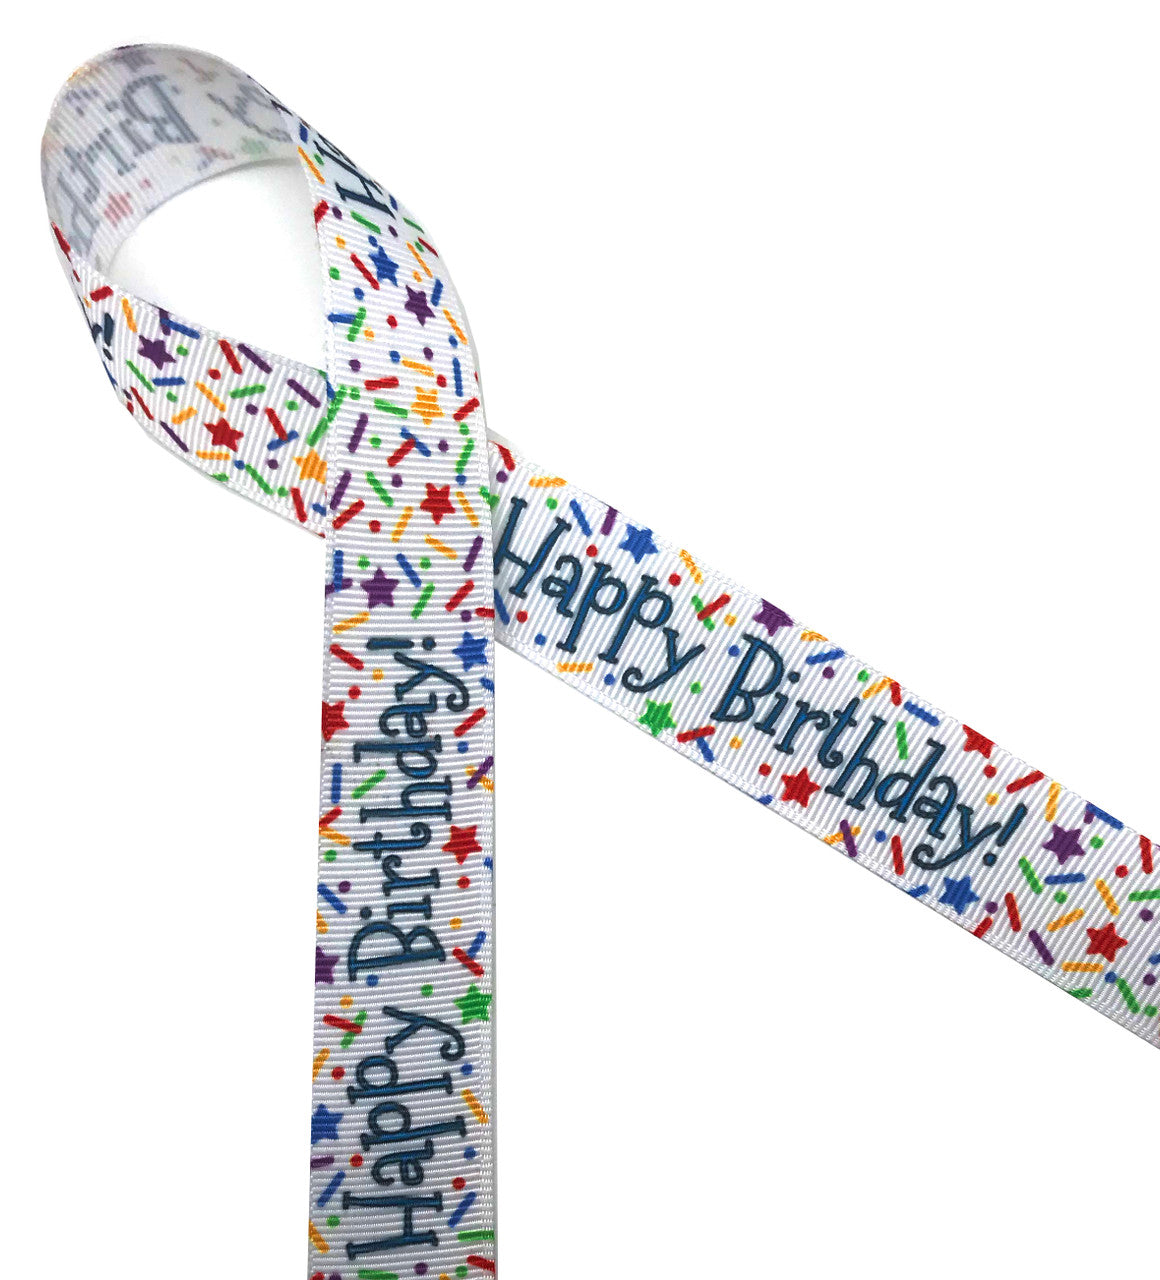 Happy Birthday with sprinkles in primary colors printed on 7/8" white grosgrain ribbon is ideal for celebrating that special day! This is an ideal ribbon for gifts, crafts, scrapbooking and party favors! Our ribbon is designed and printed in the USA